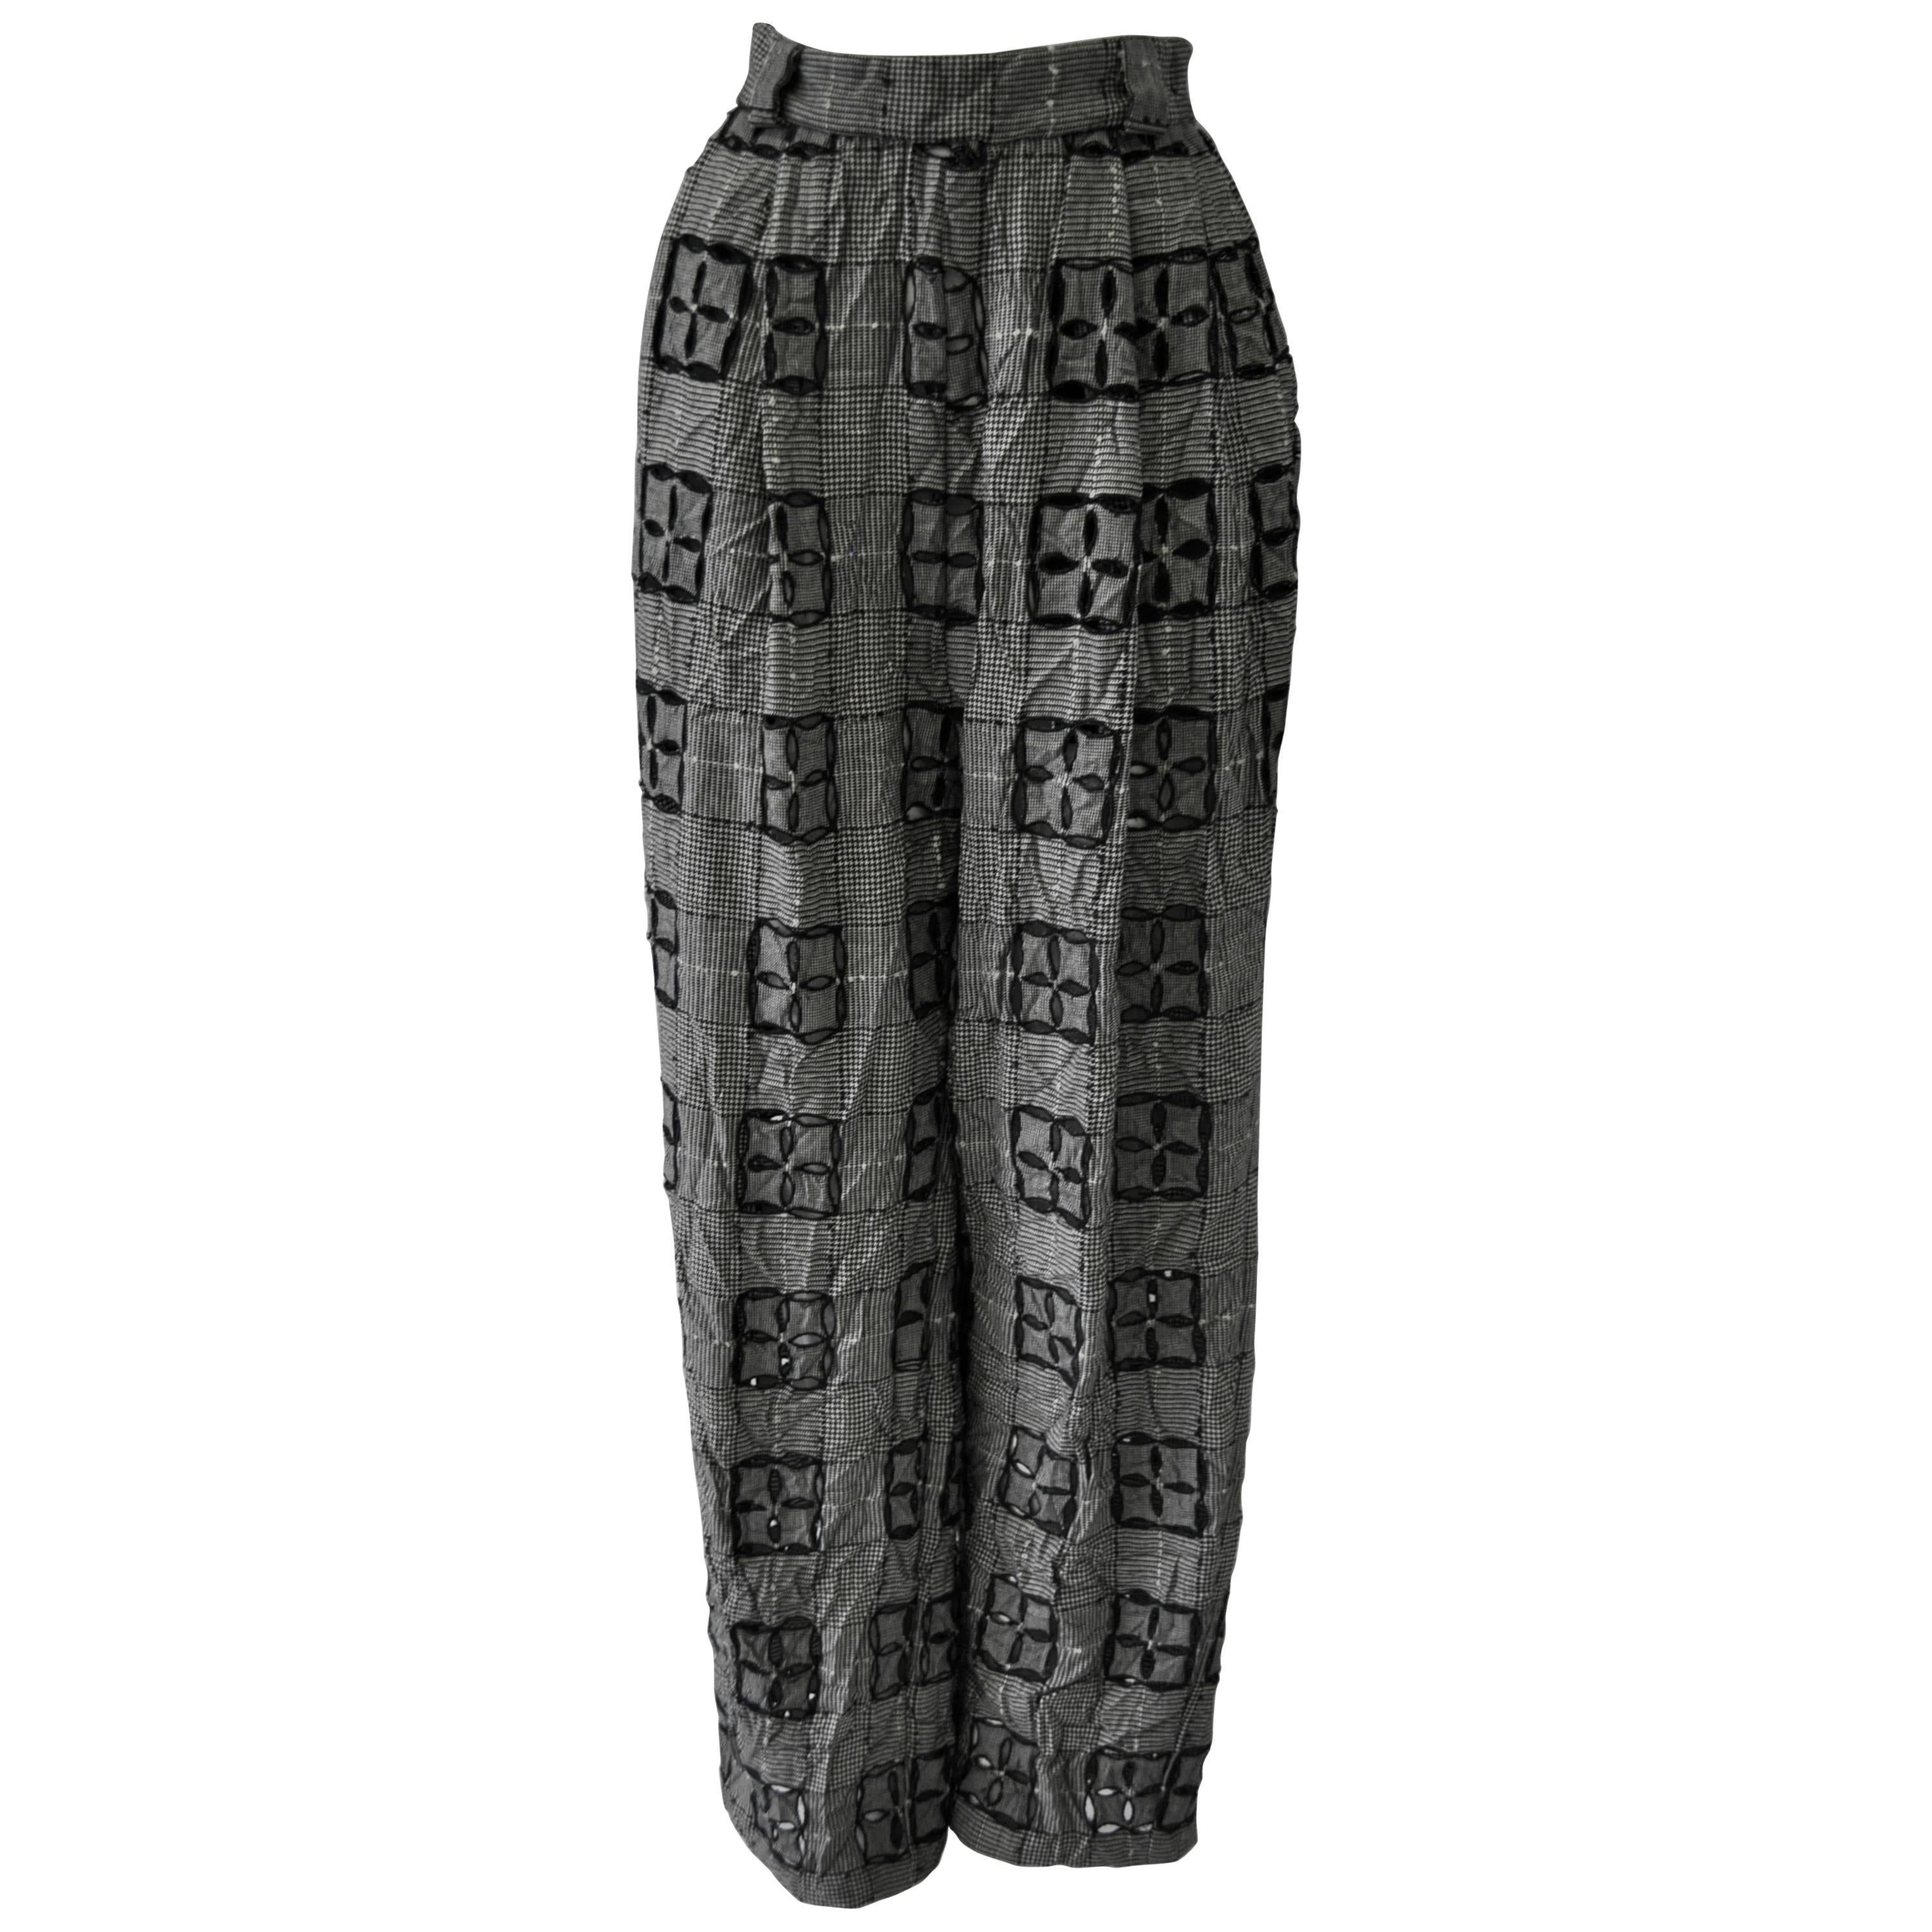 Extremely Original Atelier Versace Black and White Perforated Check Print Pants For Sale